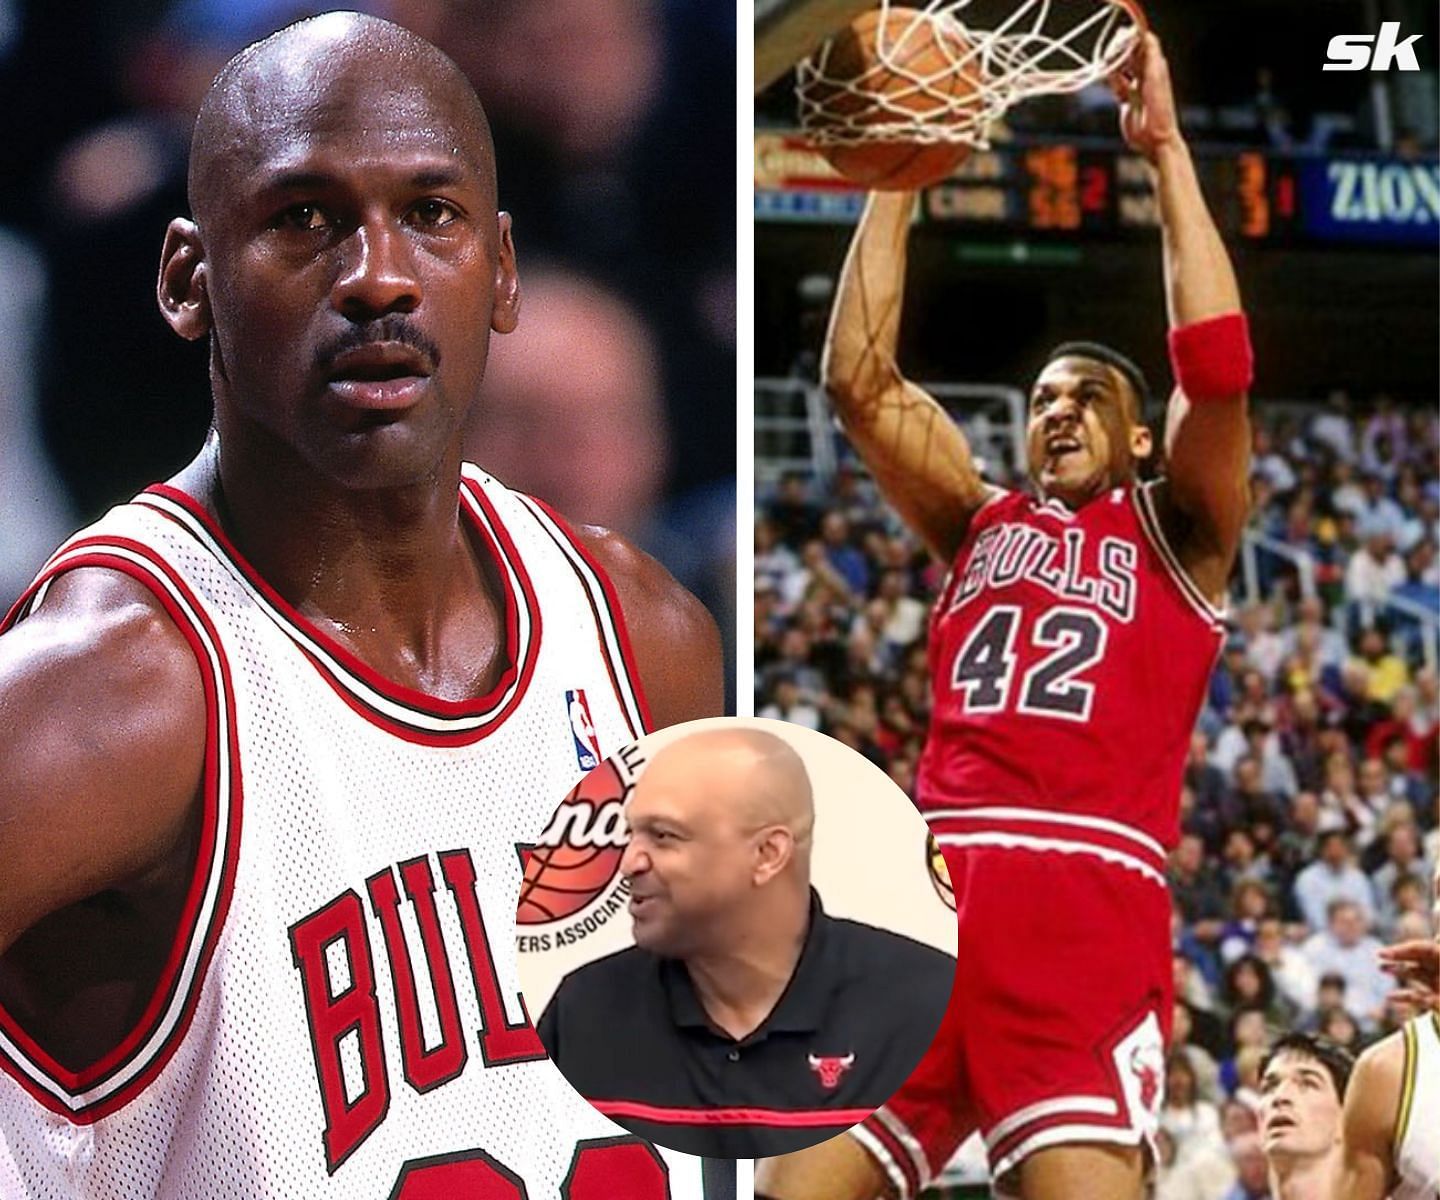 Scott Williams recalls the 1992 NBA Finals where he helped Michael Jordan and the Bulls clinch their second title